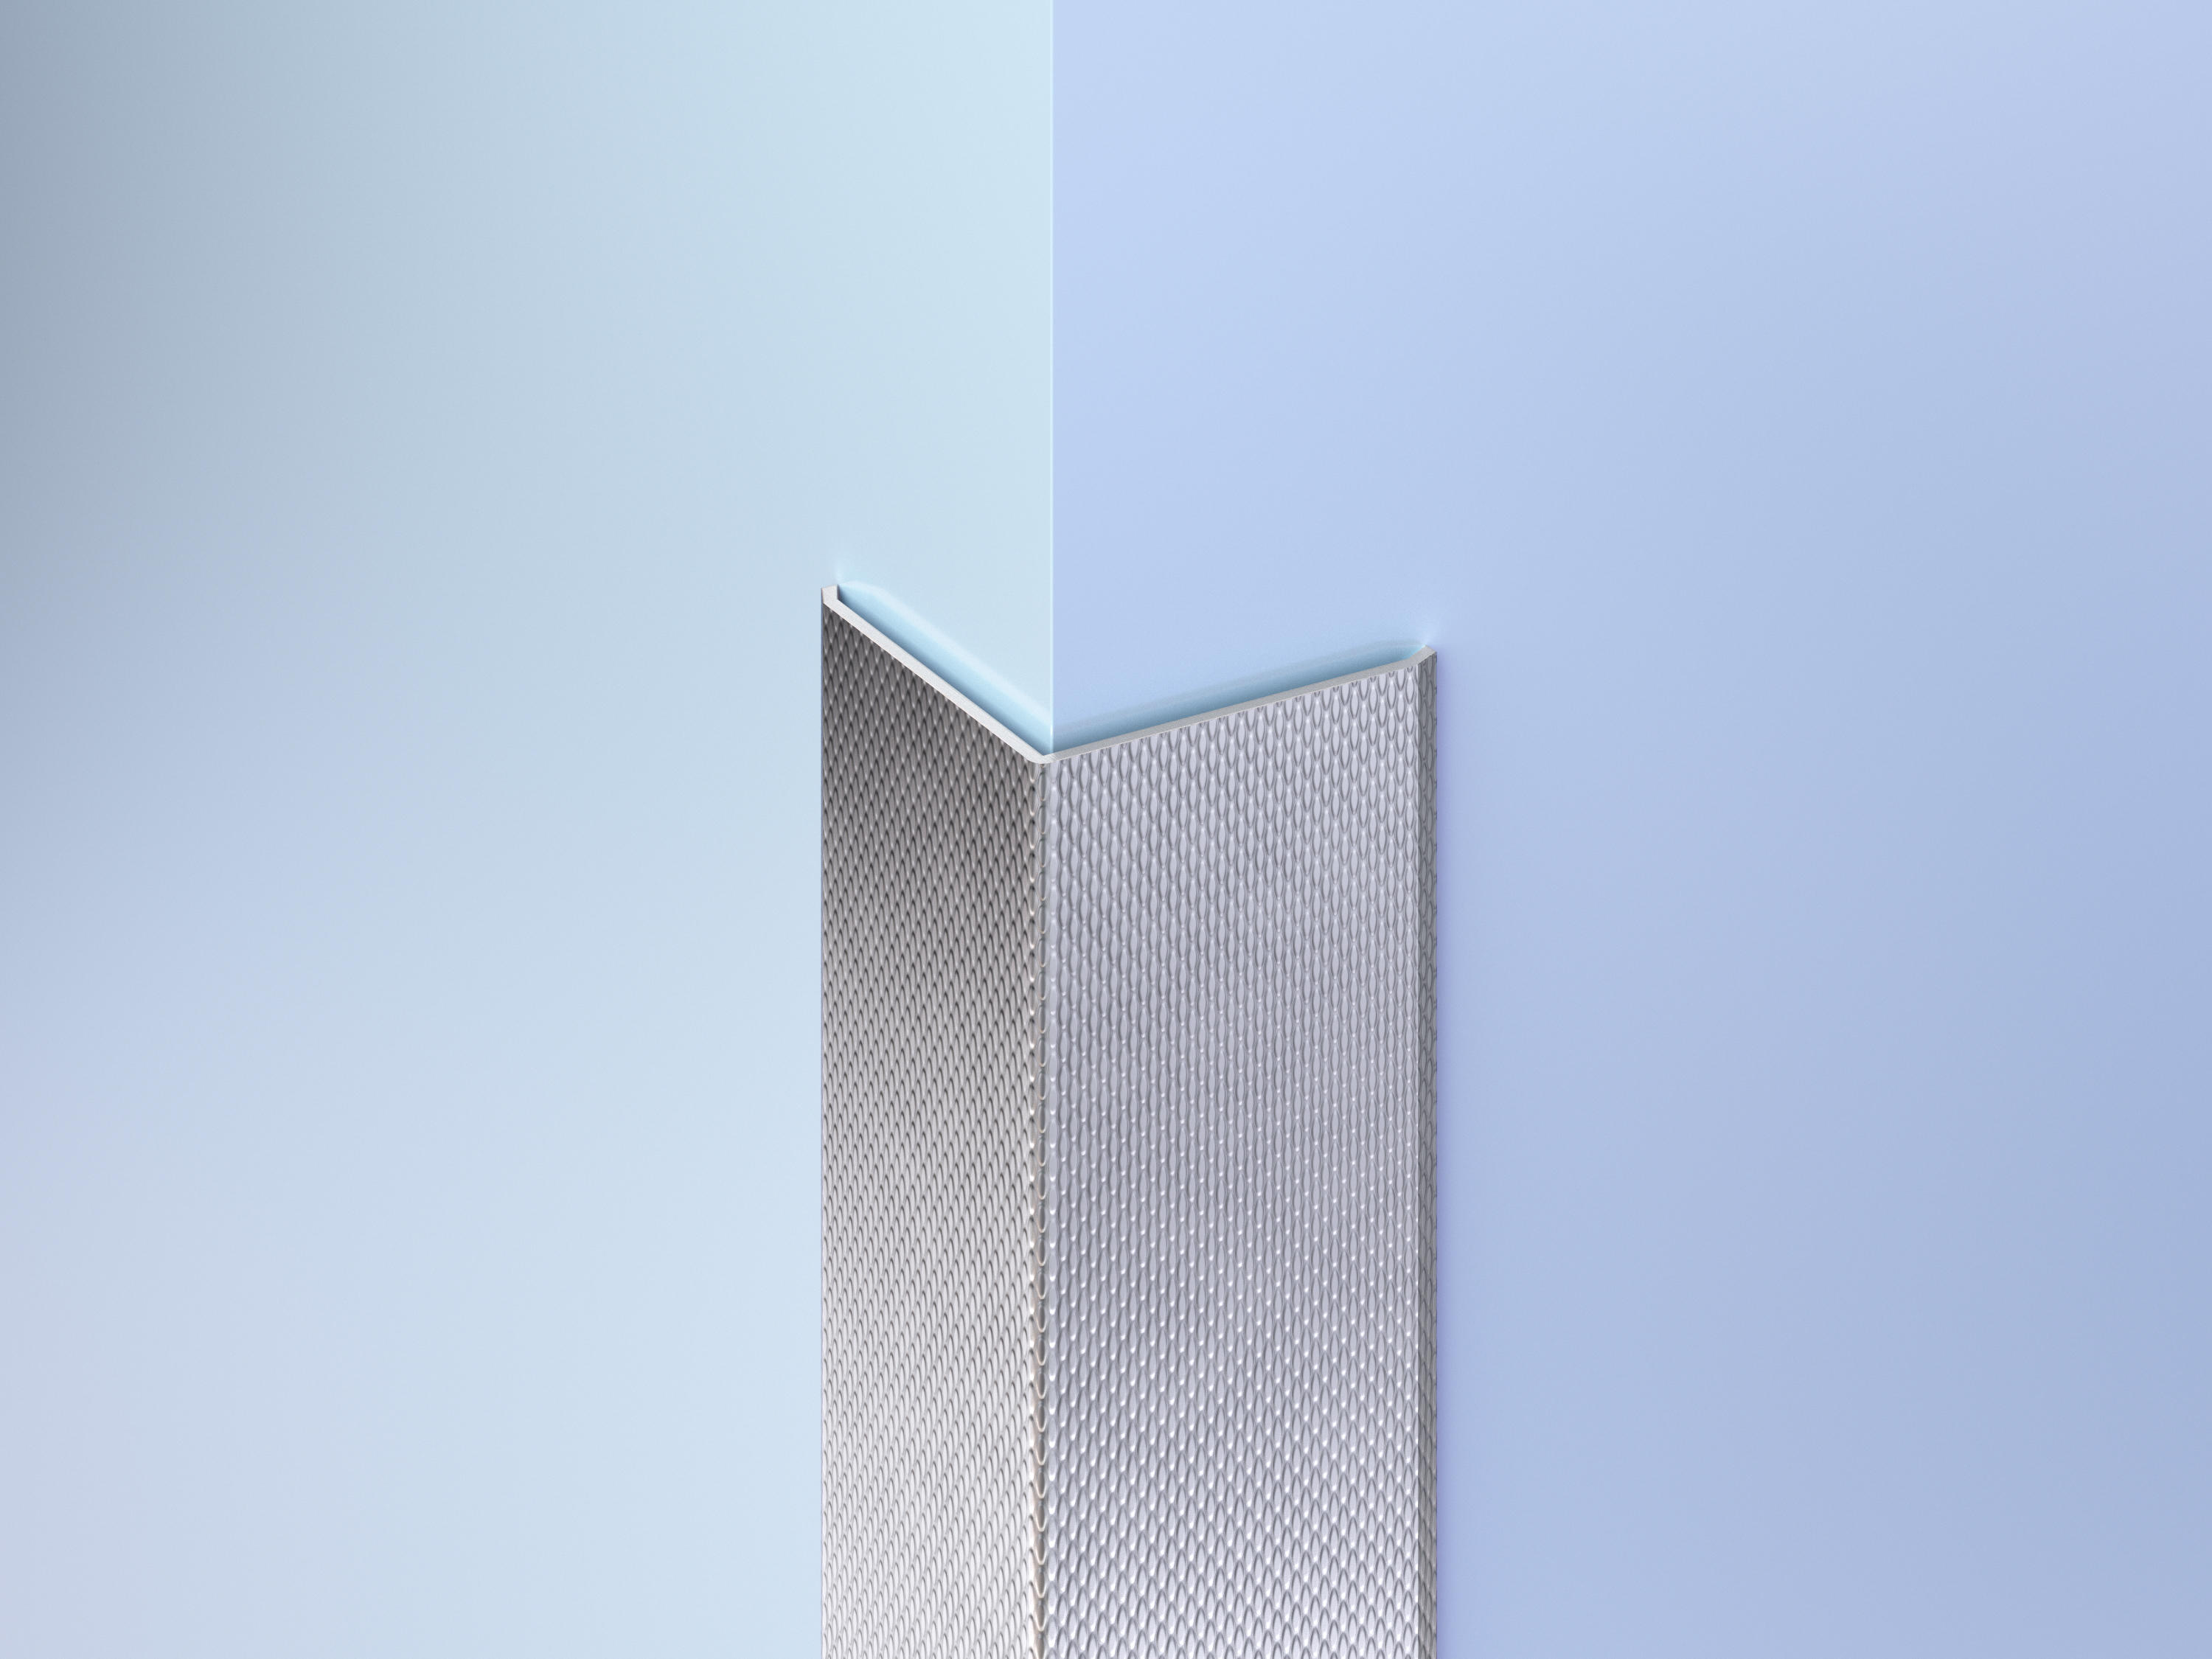 Patterned Stainless Steel Corner Guards